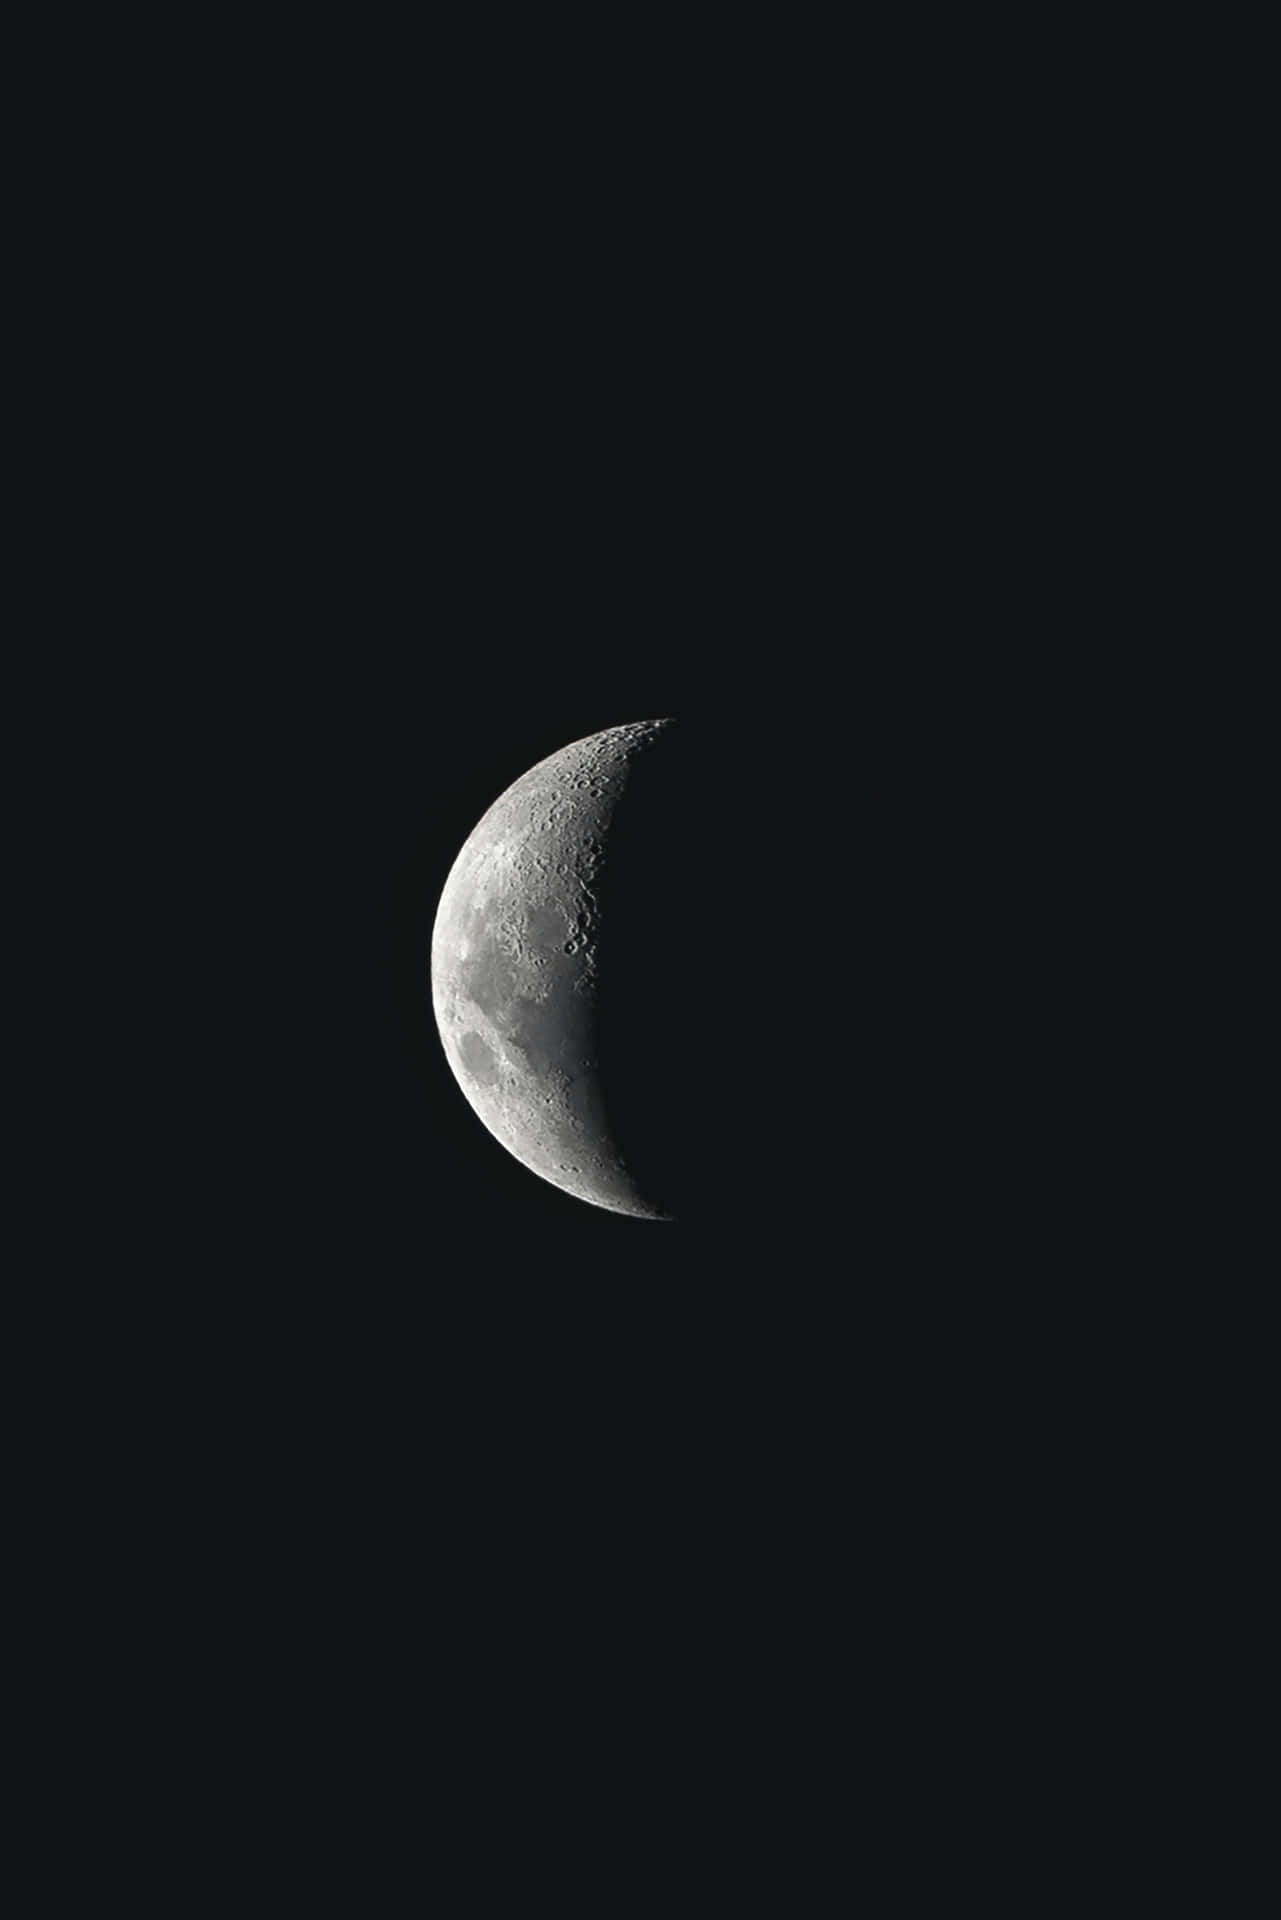 A Crescent Is Seen In The Dark Sky Background